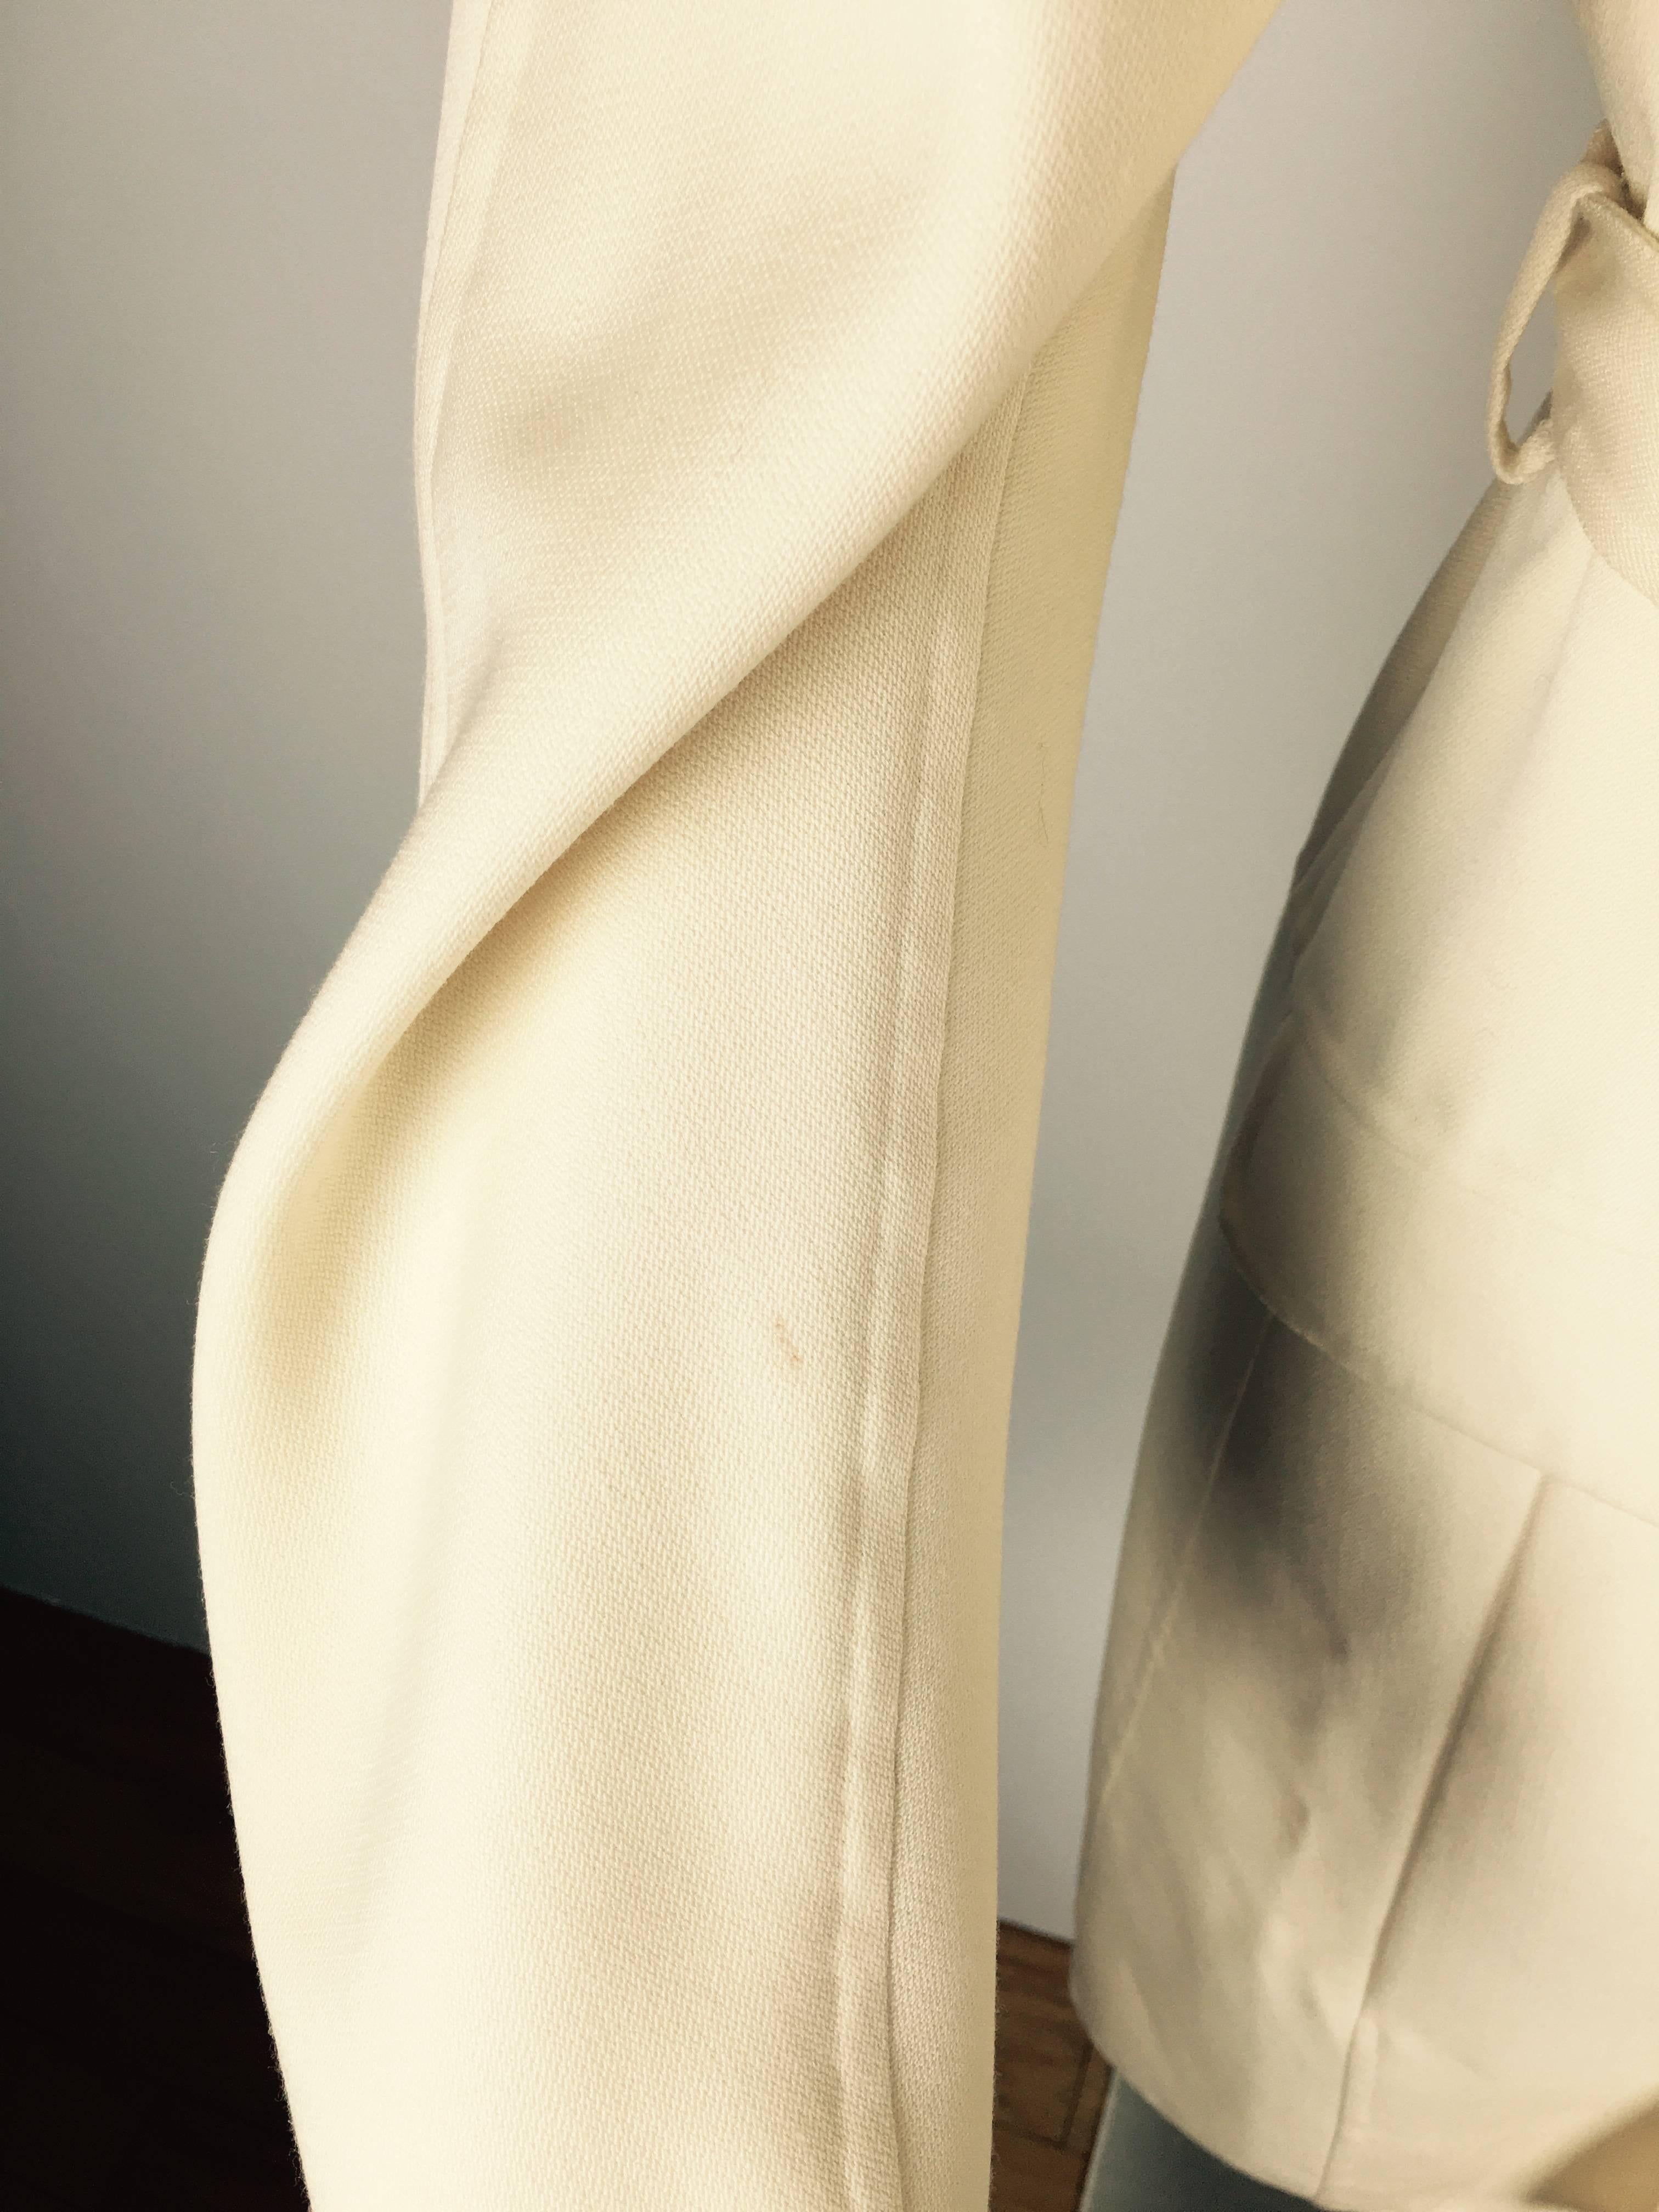 Chado Ralph Rucci Belted Wool Vintage Coat.  For Sale 3